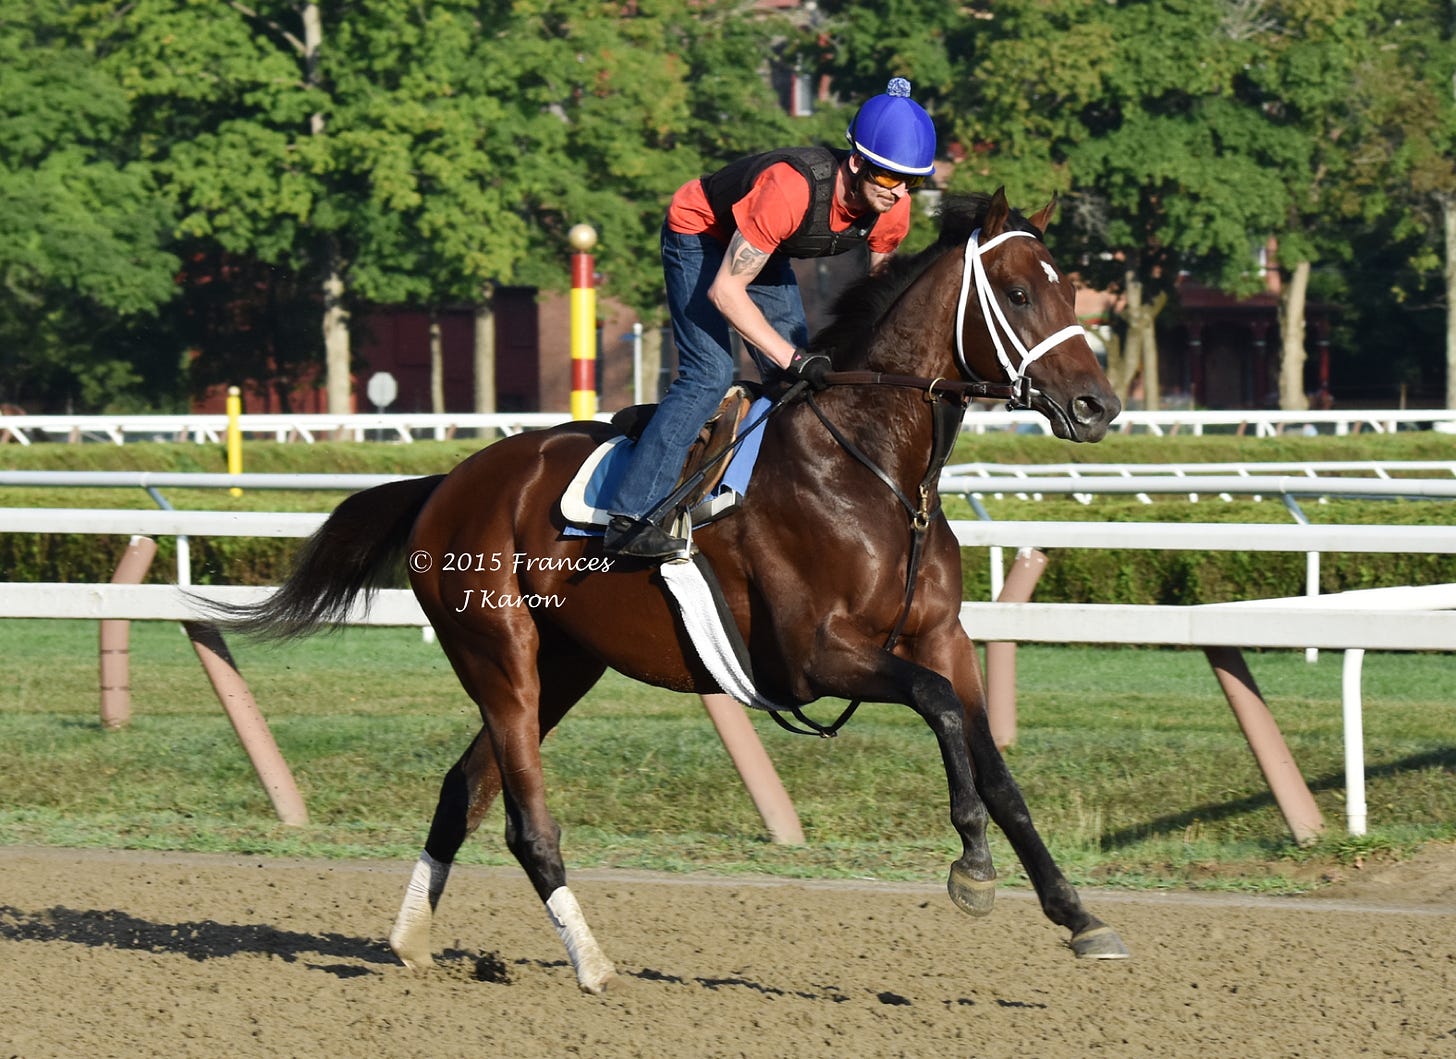 Jess’s Dream galloping at Saratoga as a three-year-old, less than two weeks before making his winning debut. Kiaran McLaughlin trained him.